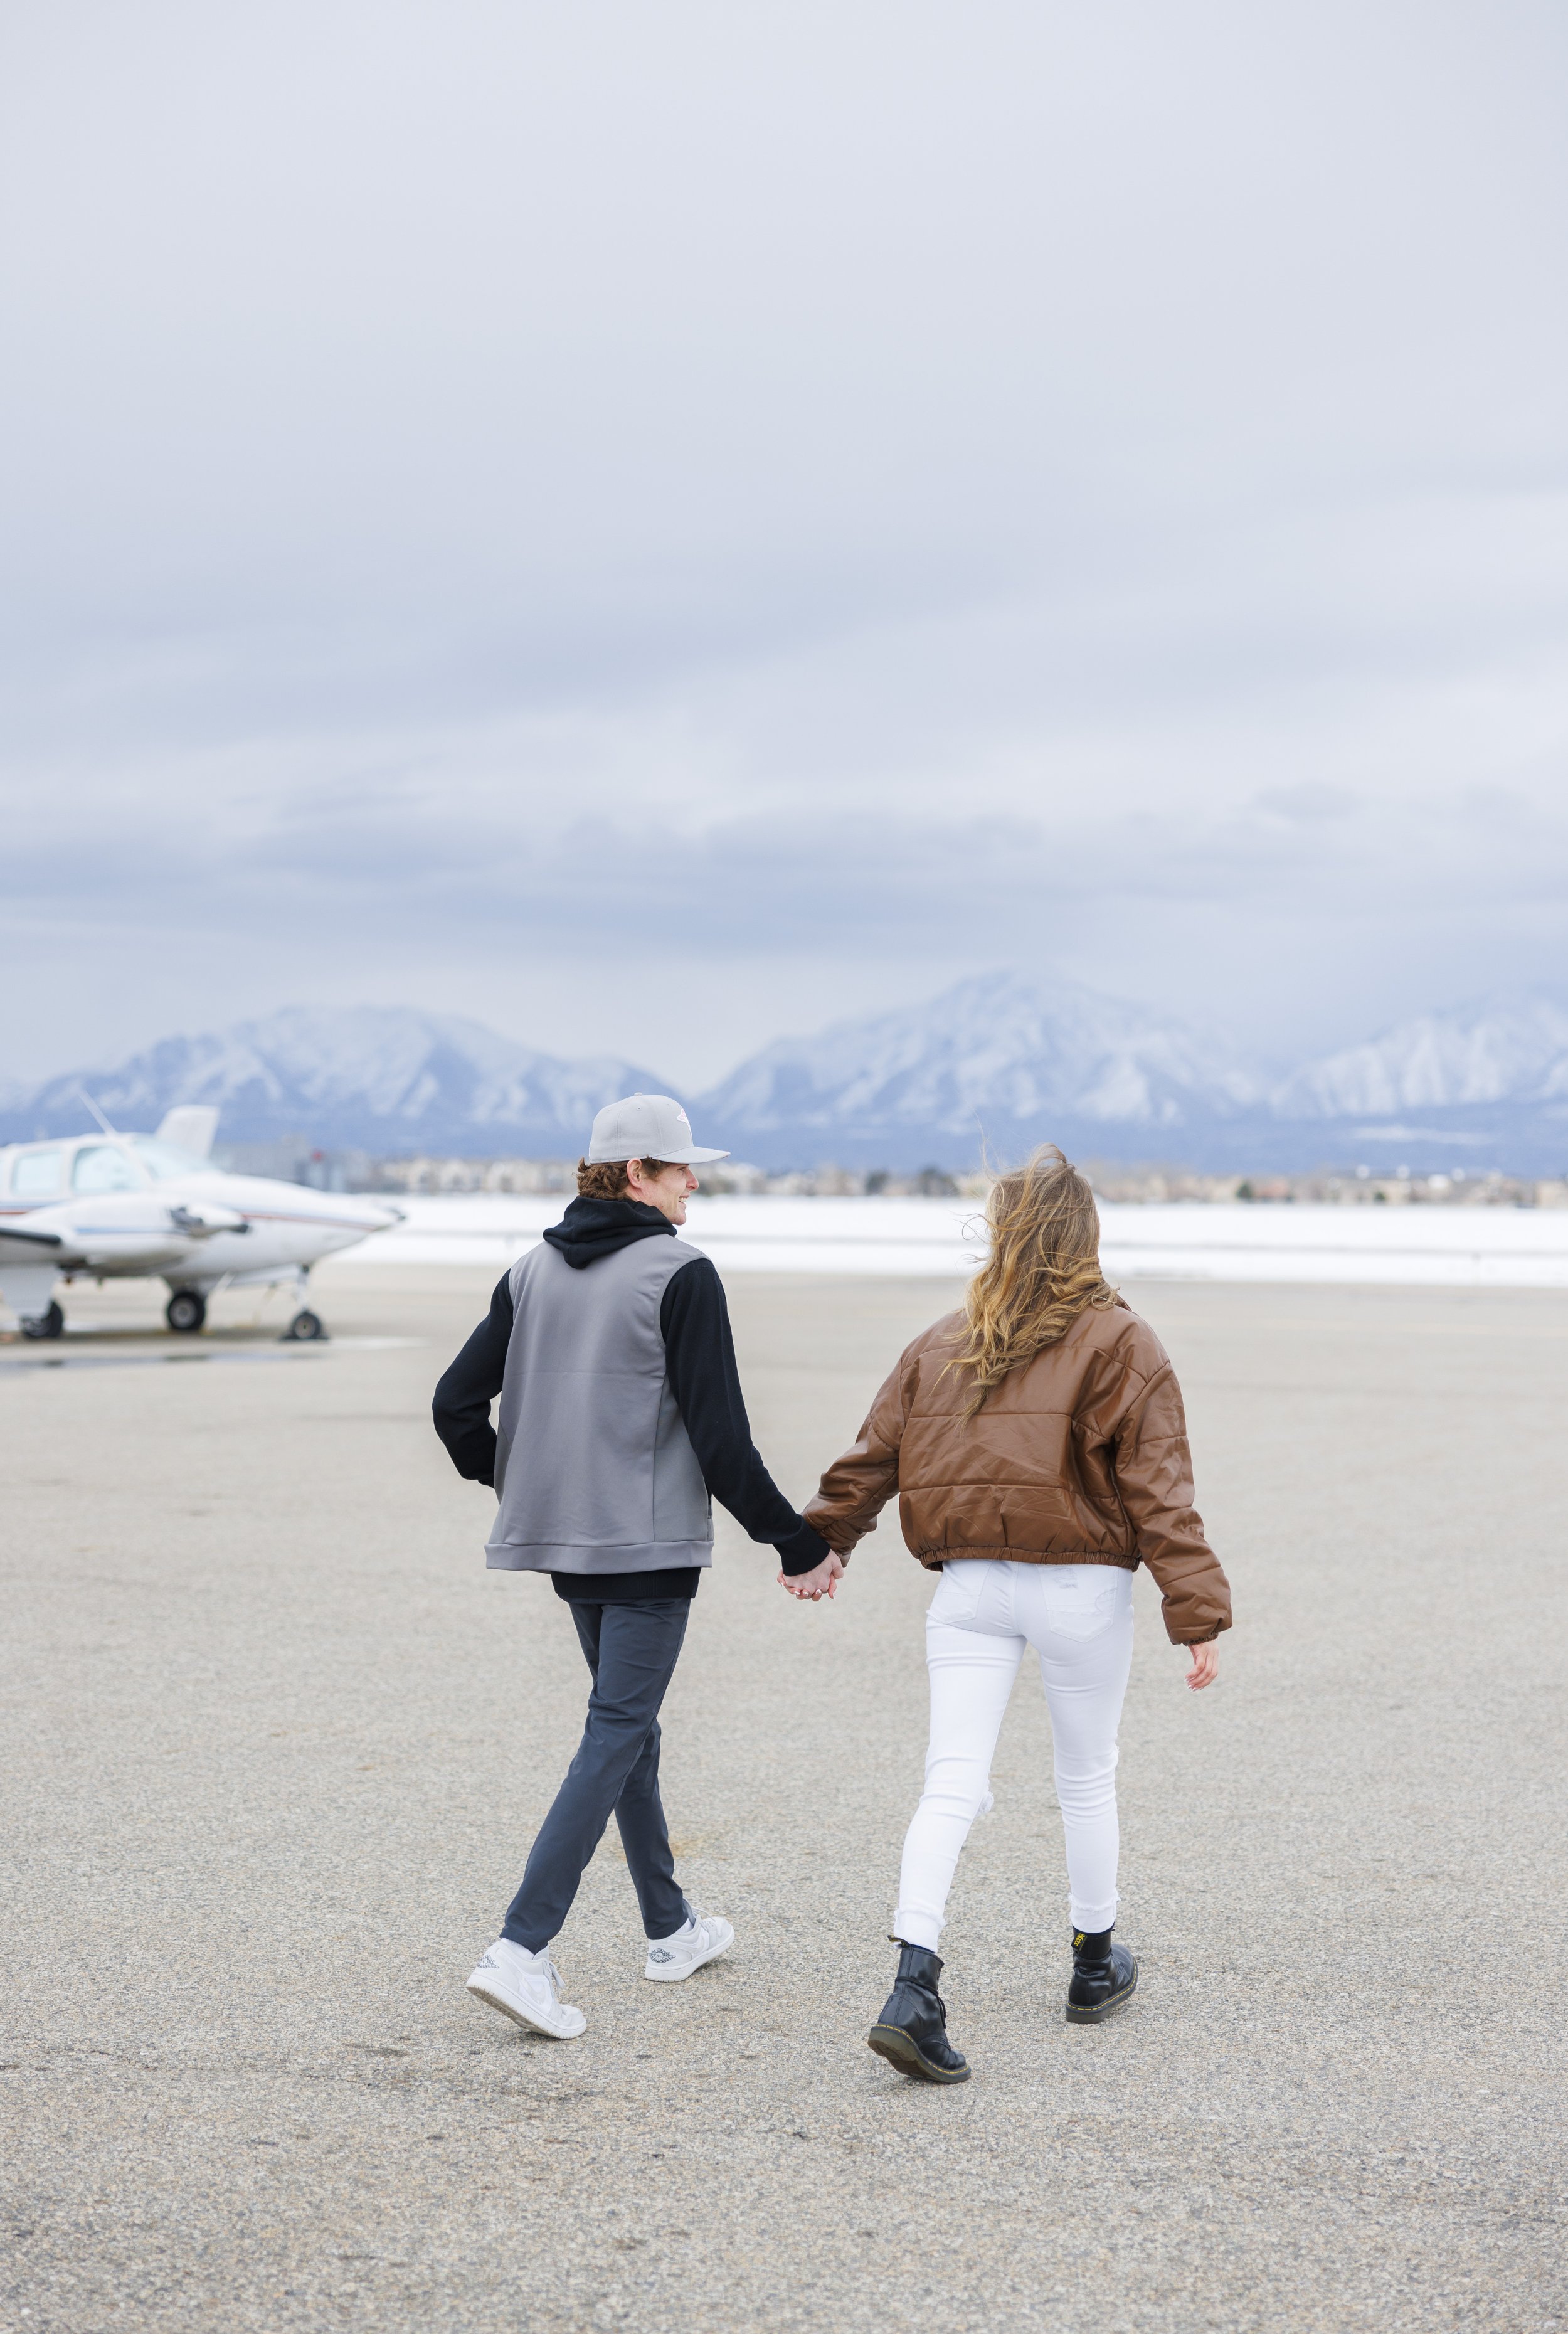  Savanna Richardson Photography captures a boyfriend and girlfriend holding hands through an airport during a proposal. travel proposal landing strip proposal #SavannaRichardsonPhotography #SavannaRichardsonEngagements #utahproposals #helicopterpropo